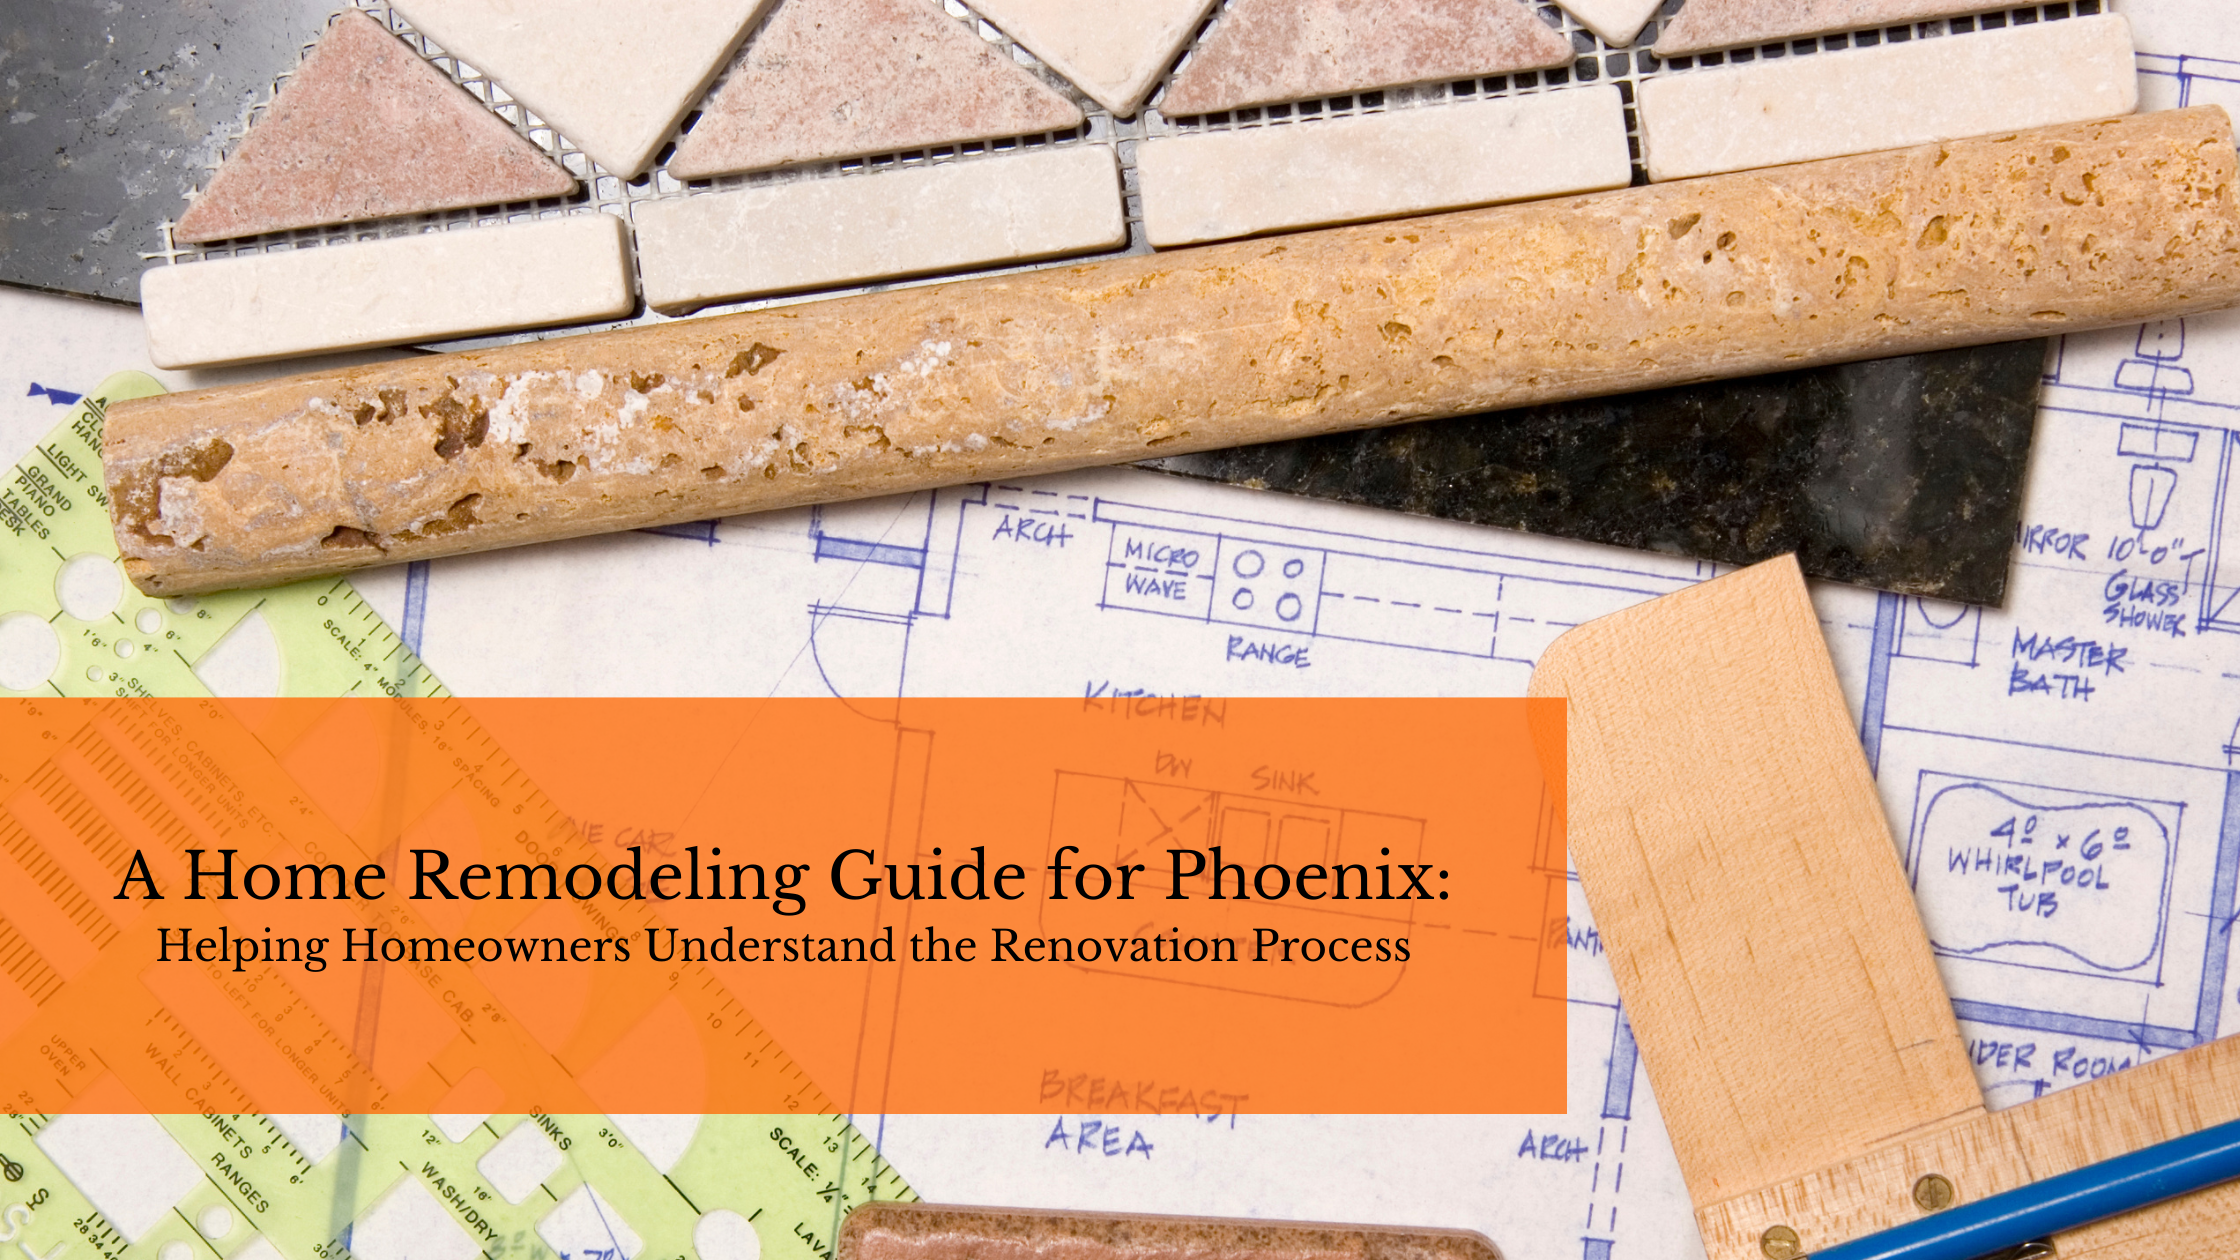 A Home Remodeling Guide for Phoenix